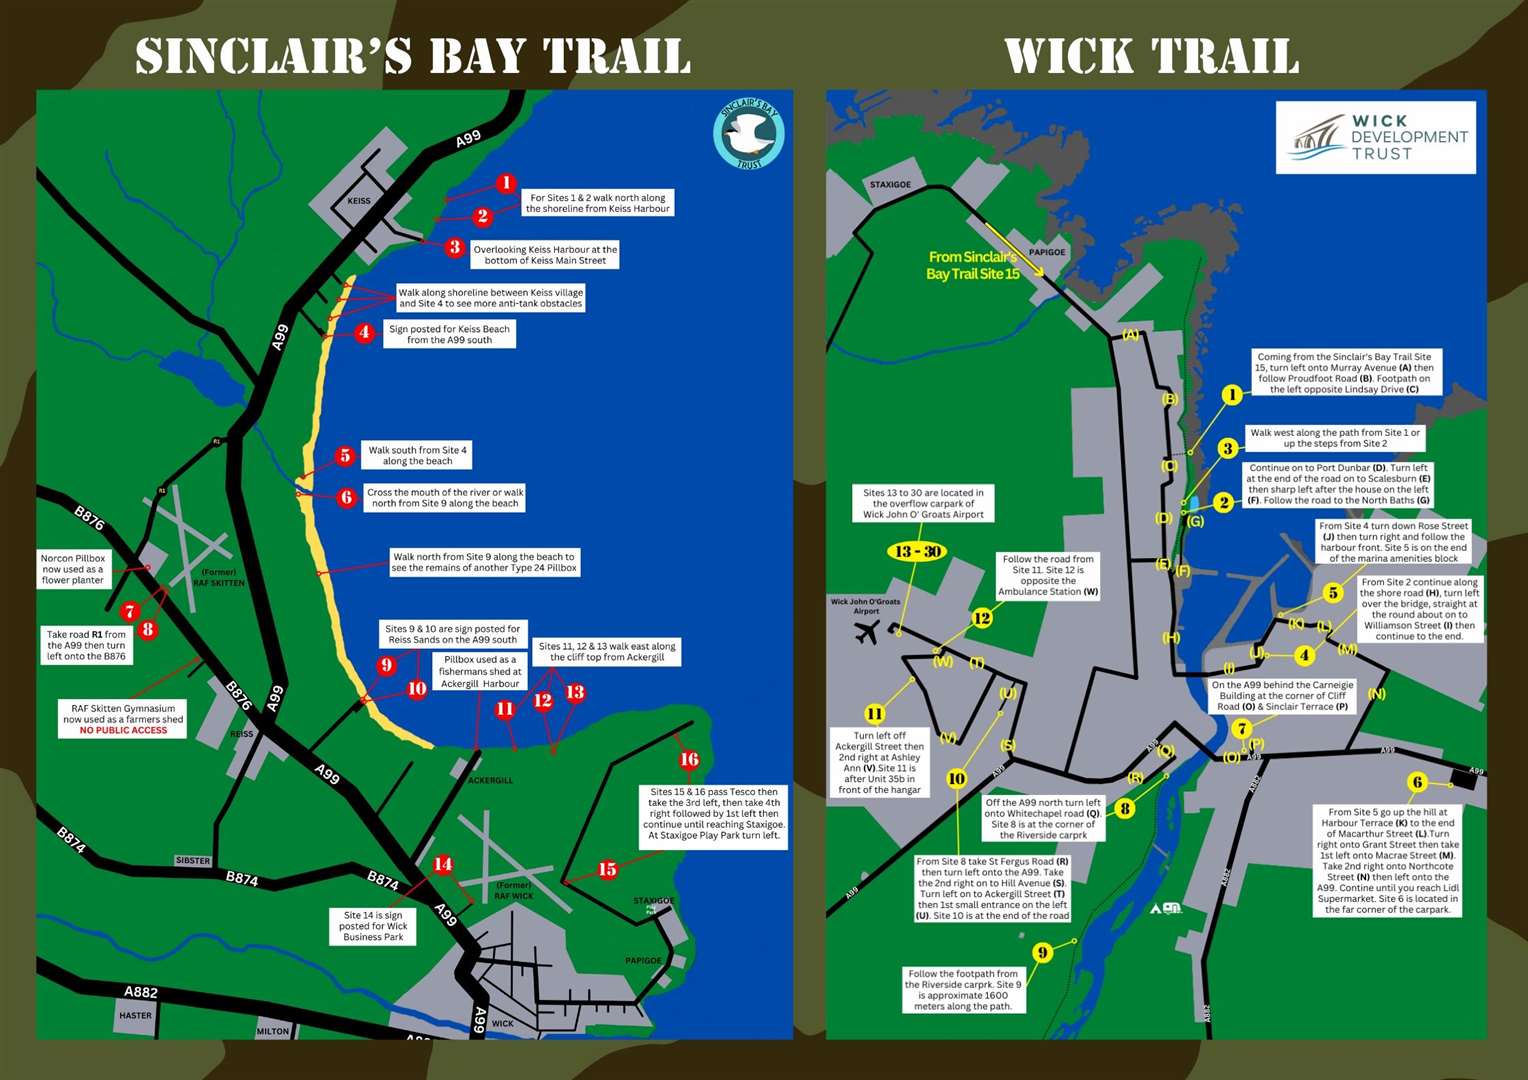 Maps for a leaflet showing the Caithness At War locations in Wick and around Sinclair’s Bay.